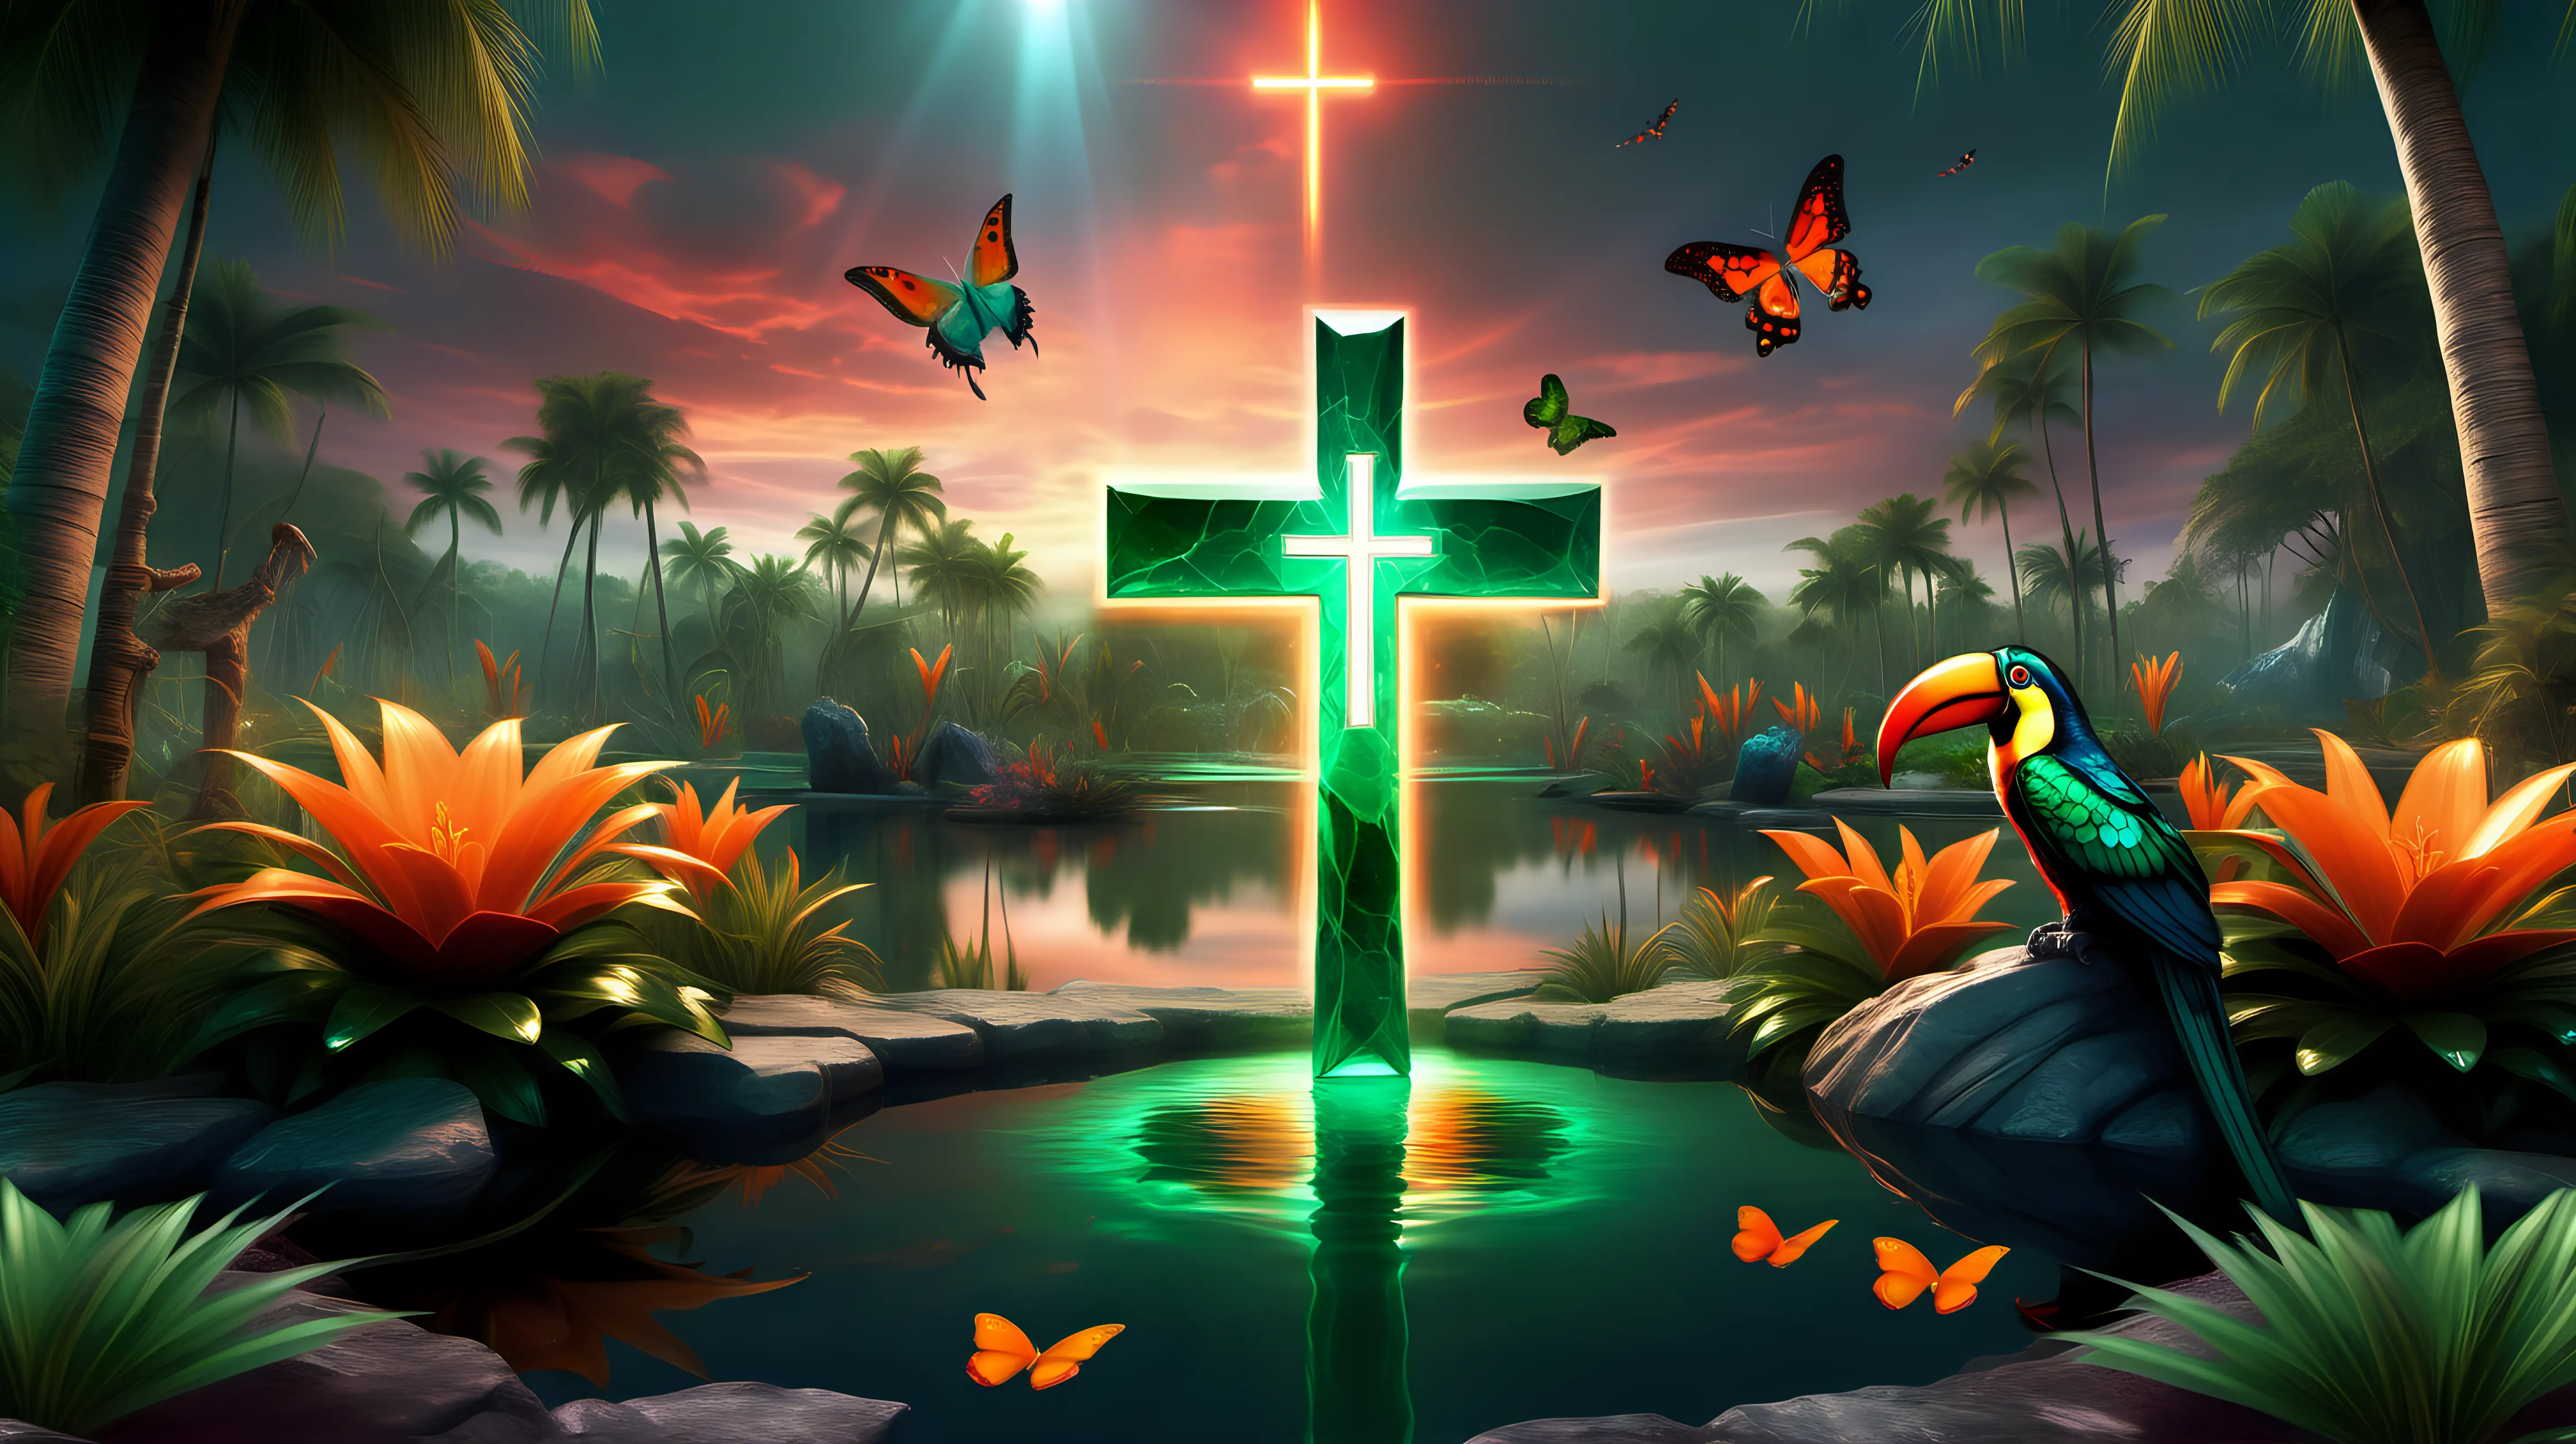 realistic image of large glowing emerald with a glowing orange cross inside sitting in the middle of a pond set in a fantasy  landscape that has a lot of colors, parrots, toucans, and butterflies
